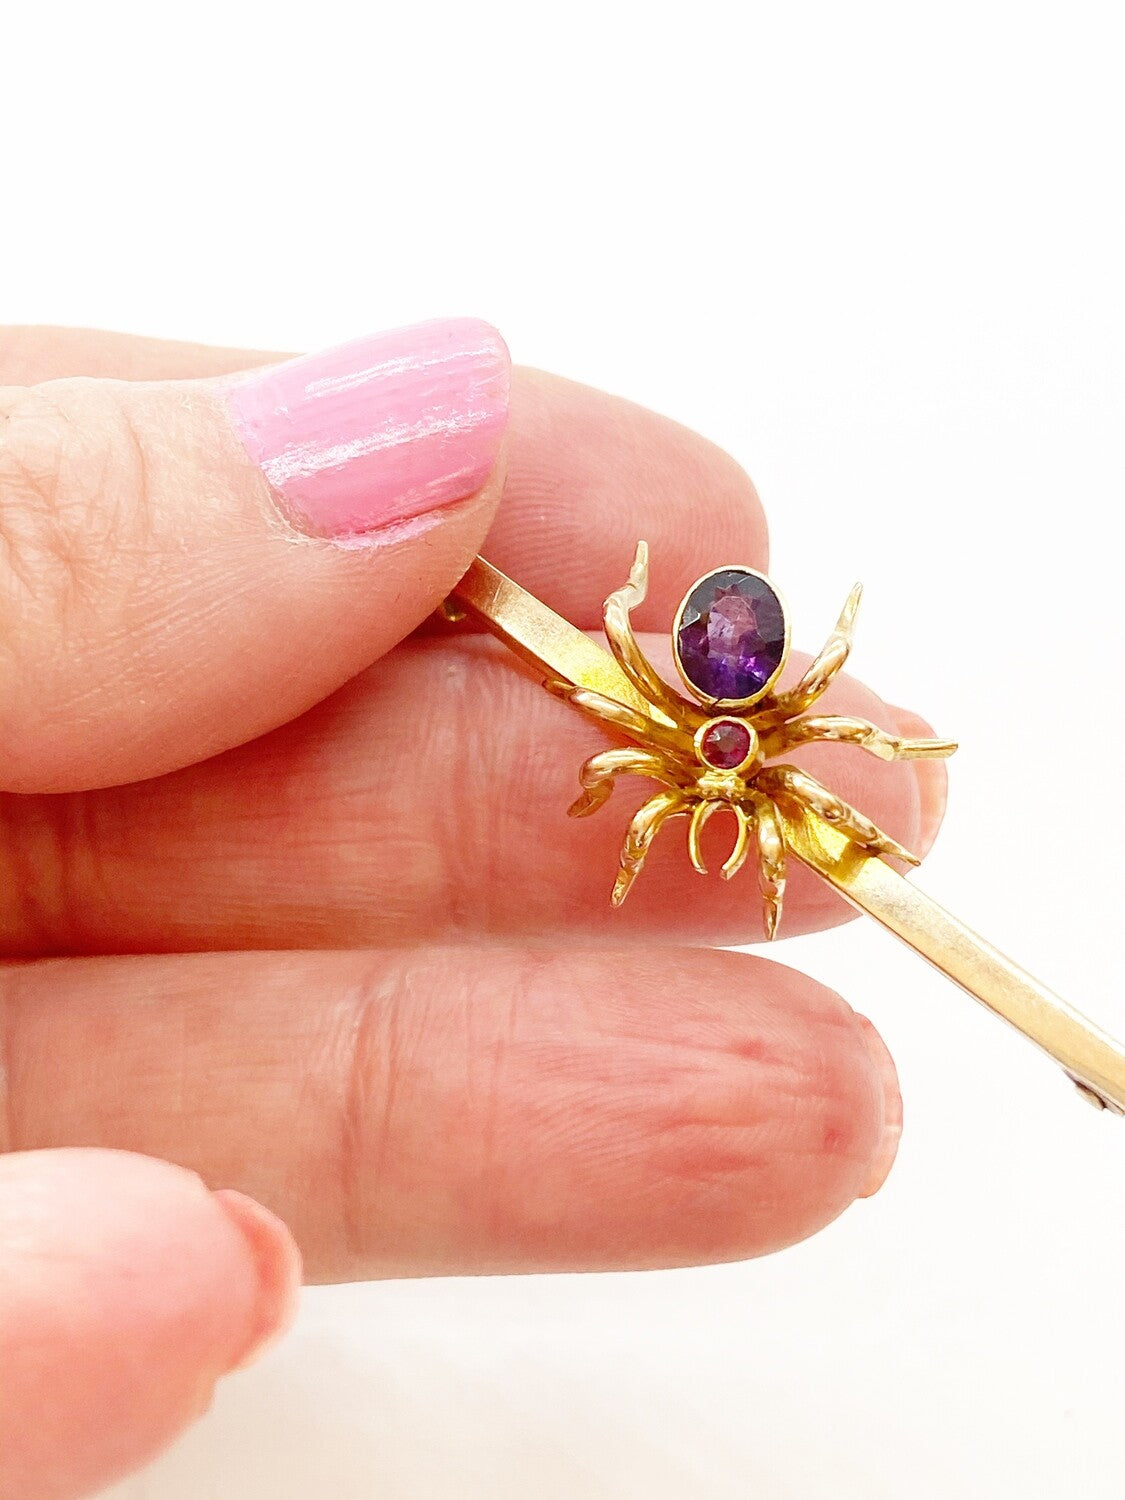 9ct vintage spider brooch with Amethyst body